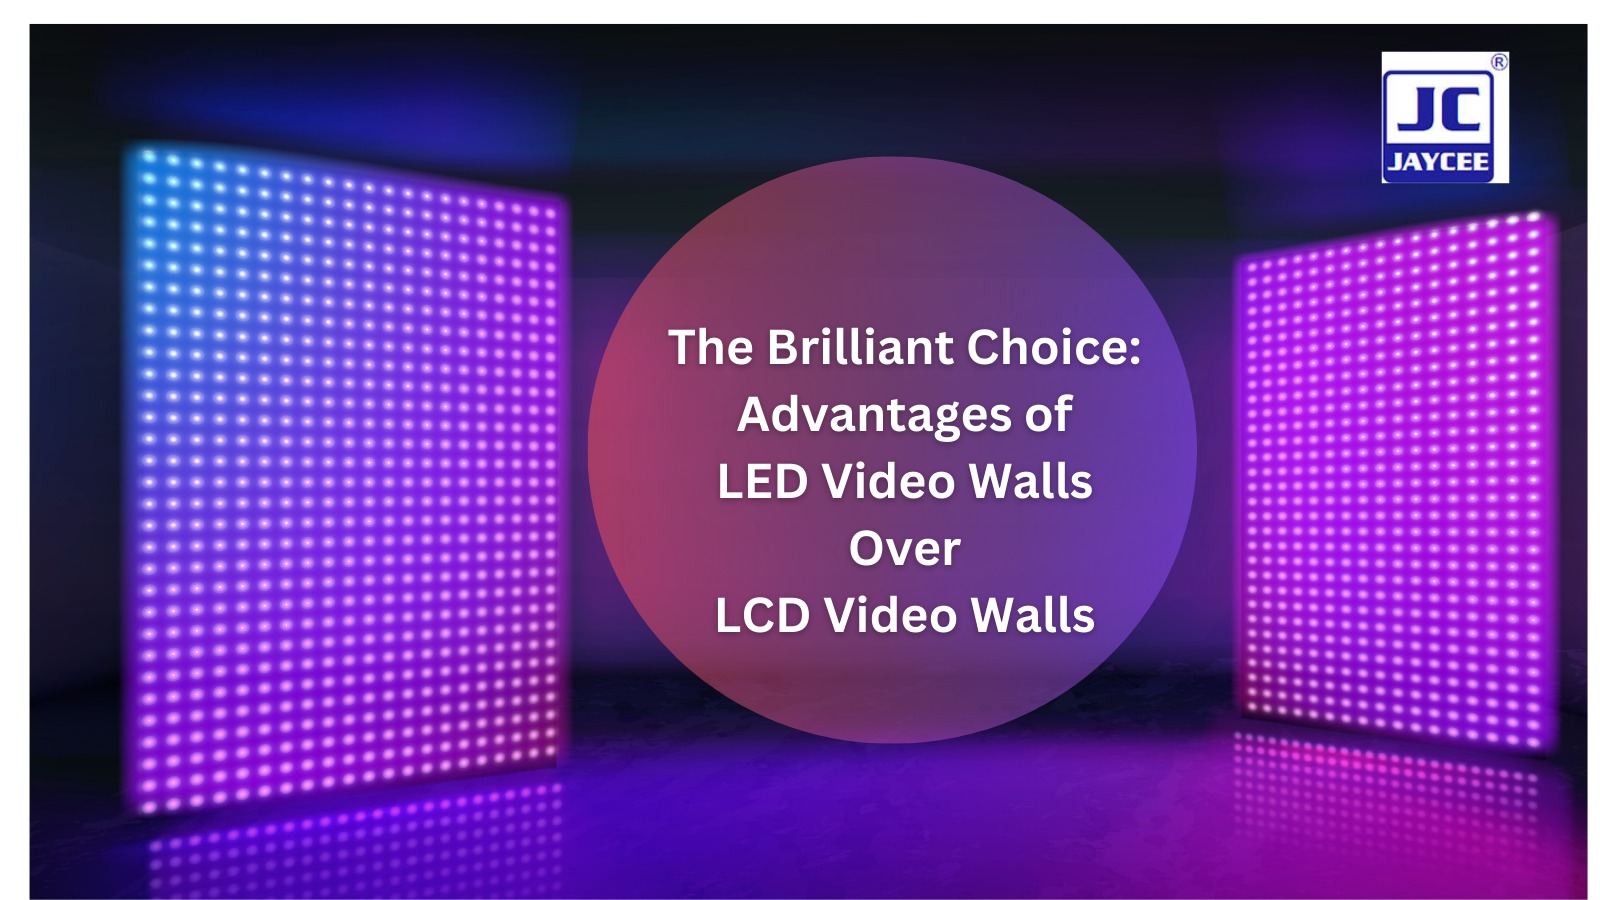 The Brilliant Choice: Advantages of LED Video Walls Over LCD Video Walls